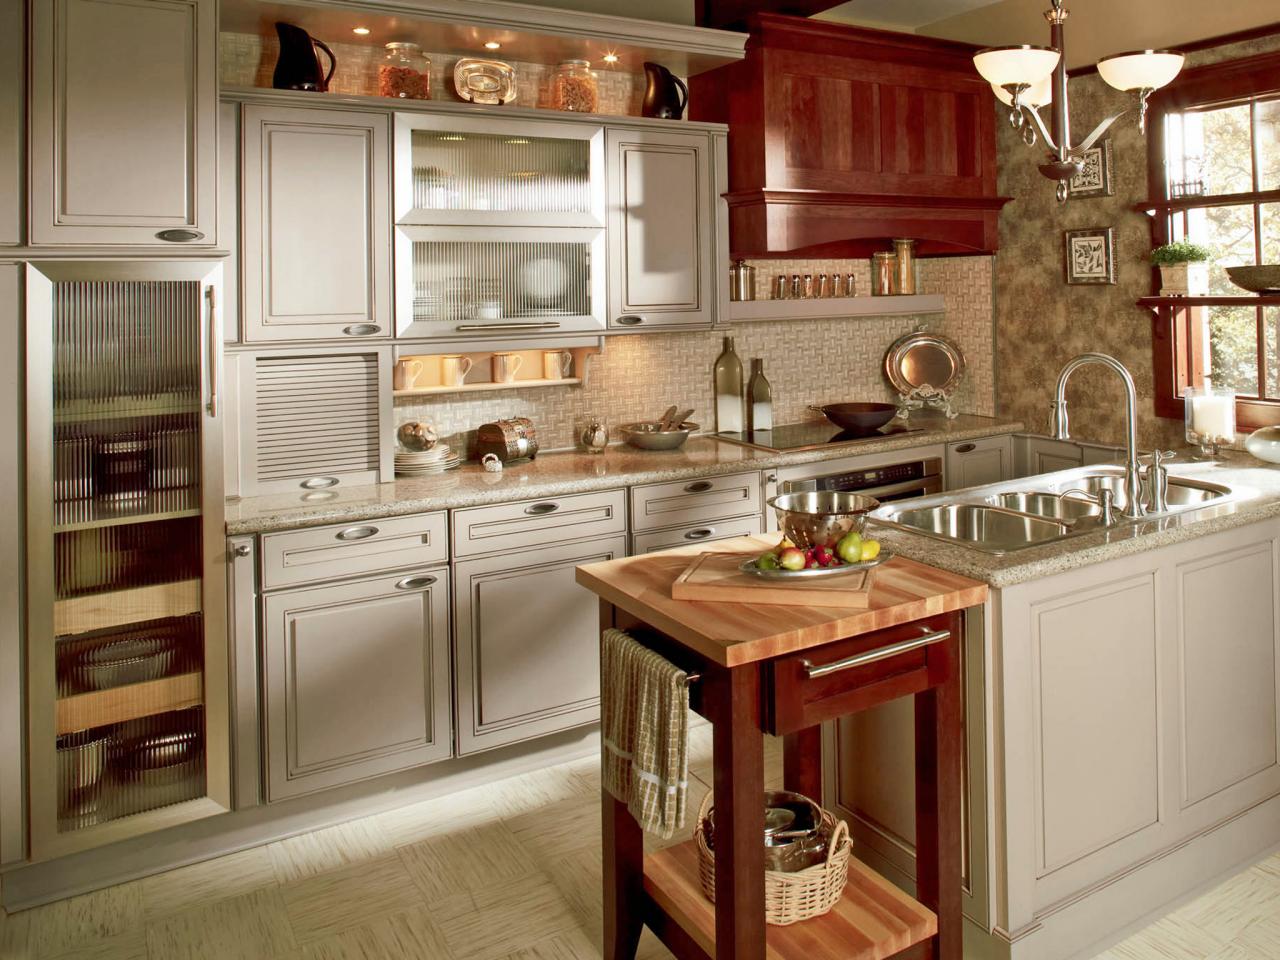 Kitchen Cabinet S Pictures Ideas, What Are The Most Affordable Kitchen Cabinets